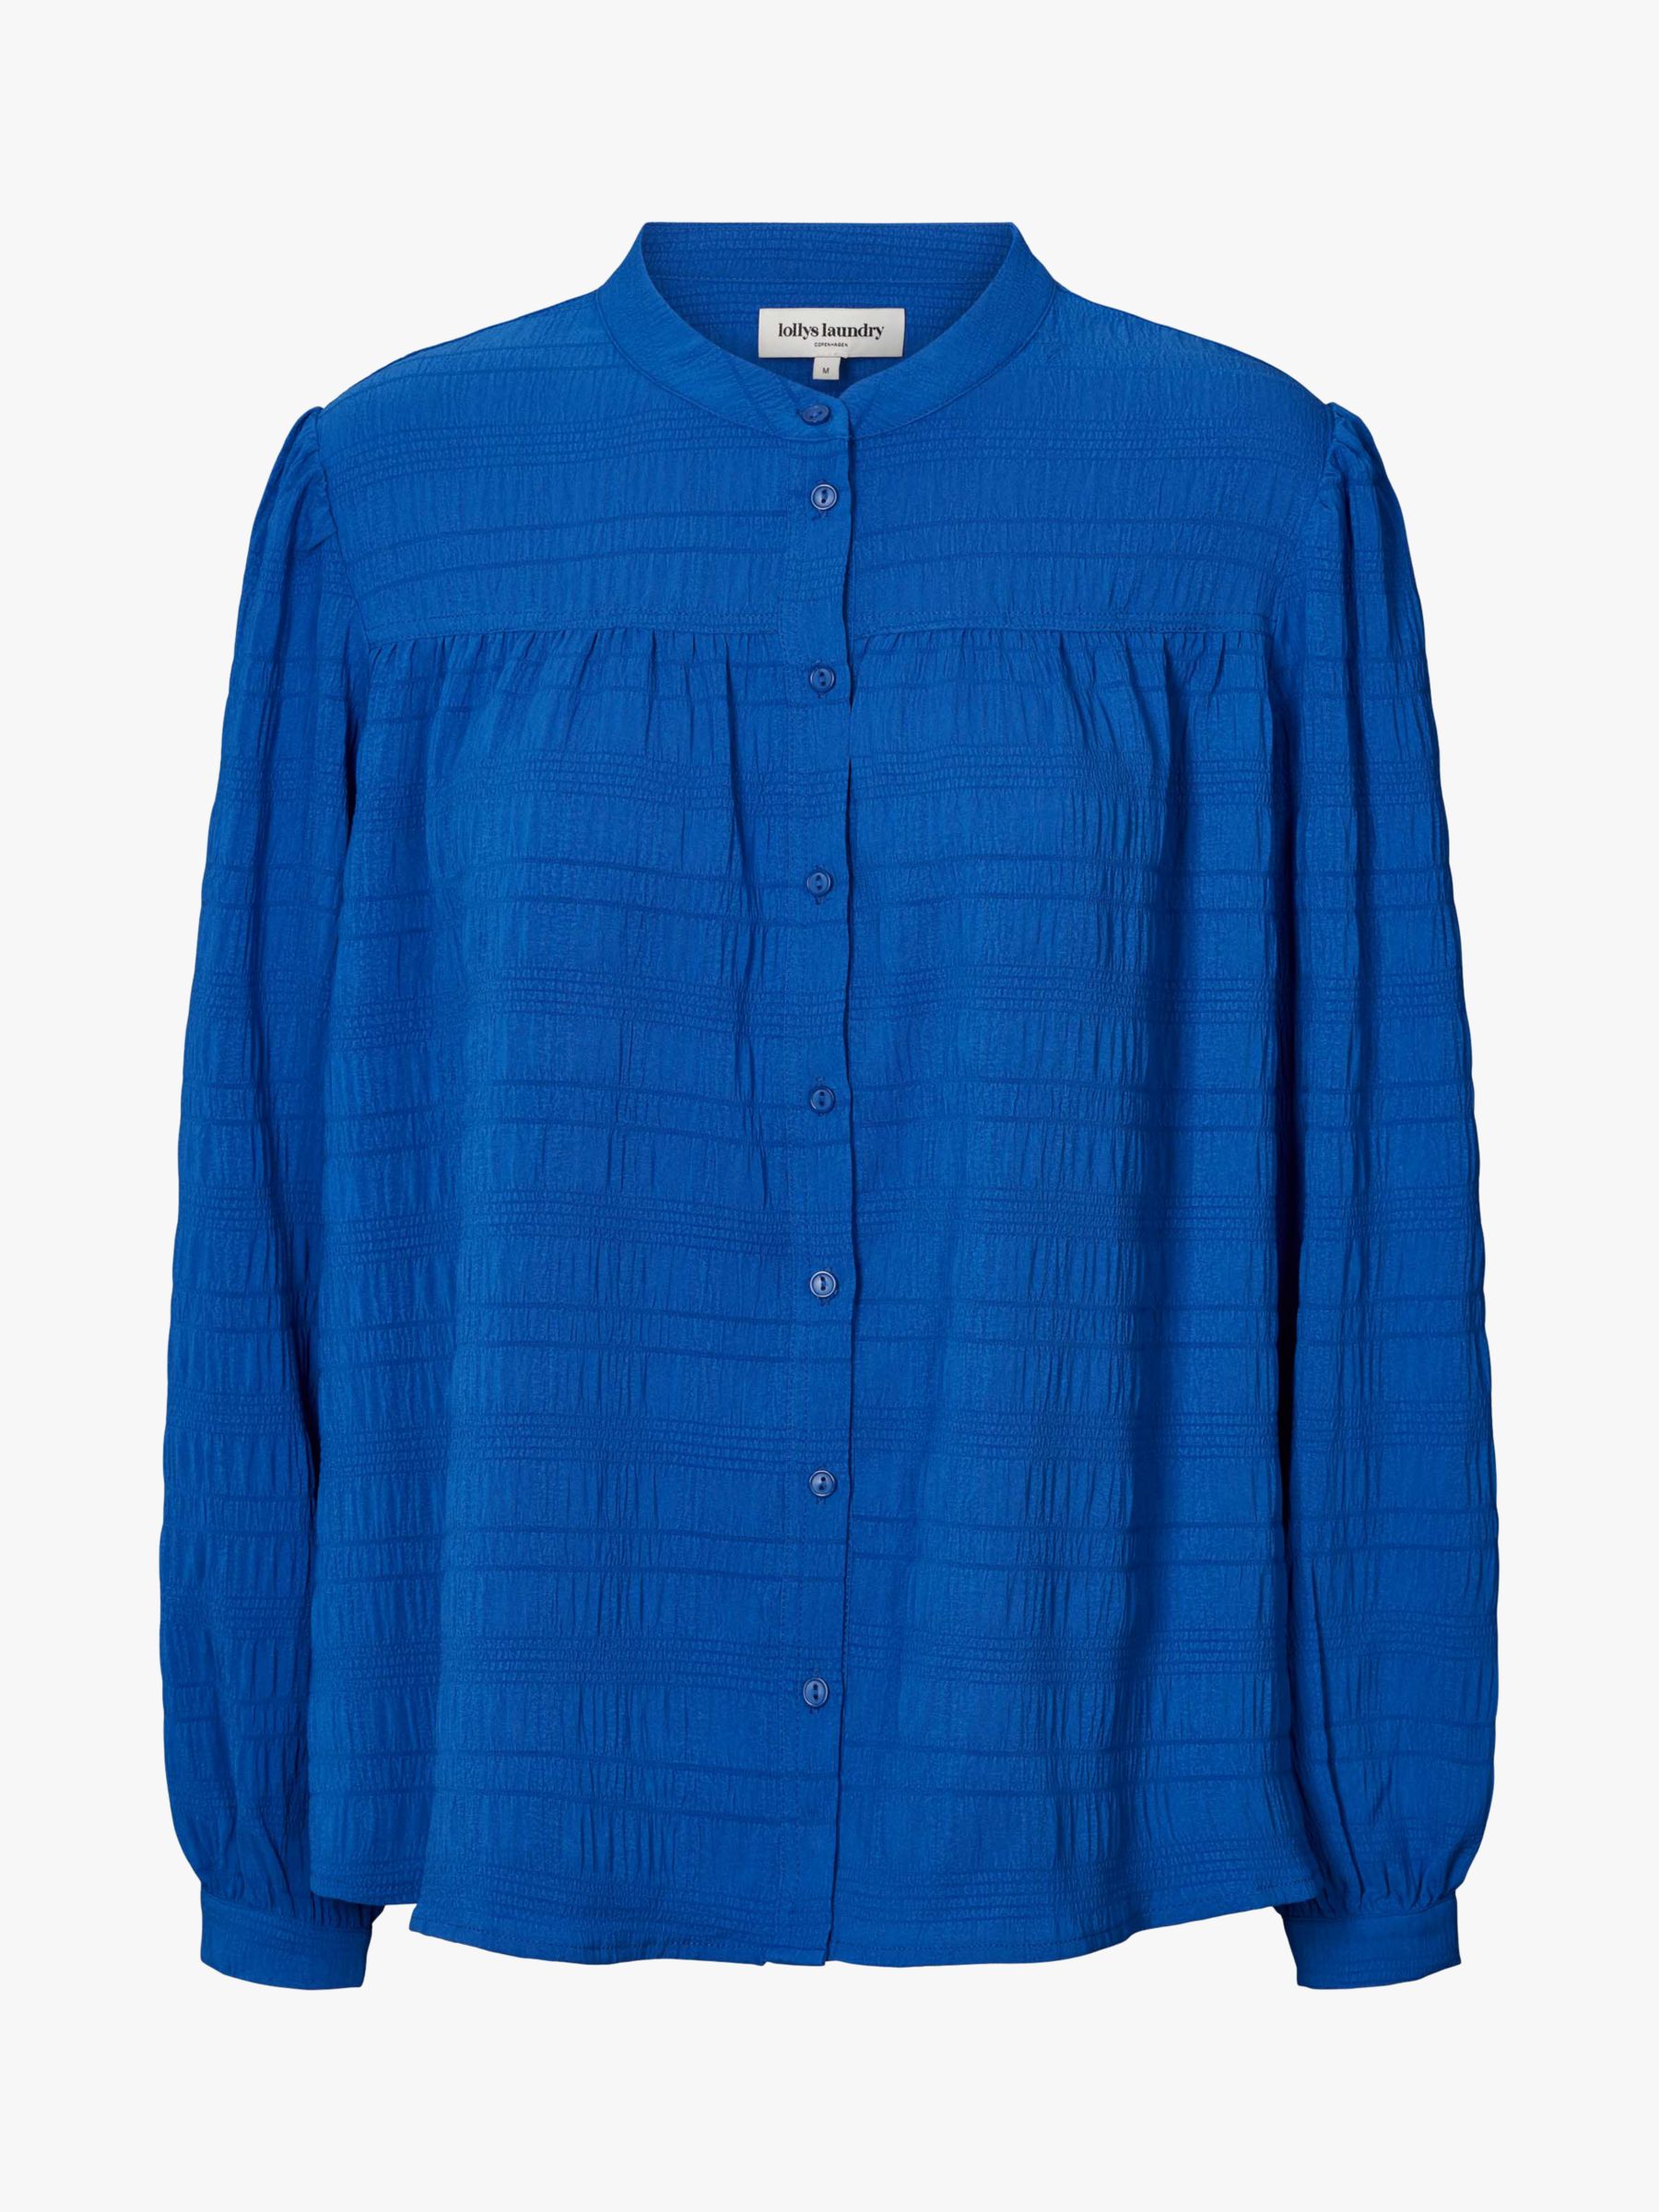 Buy Lollys Laundry Nicky Textured Shirt Online at johnlewis.com